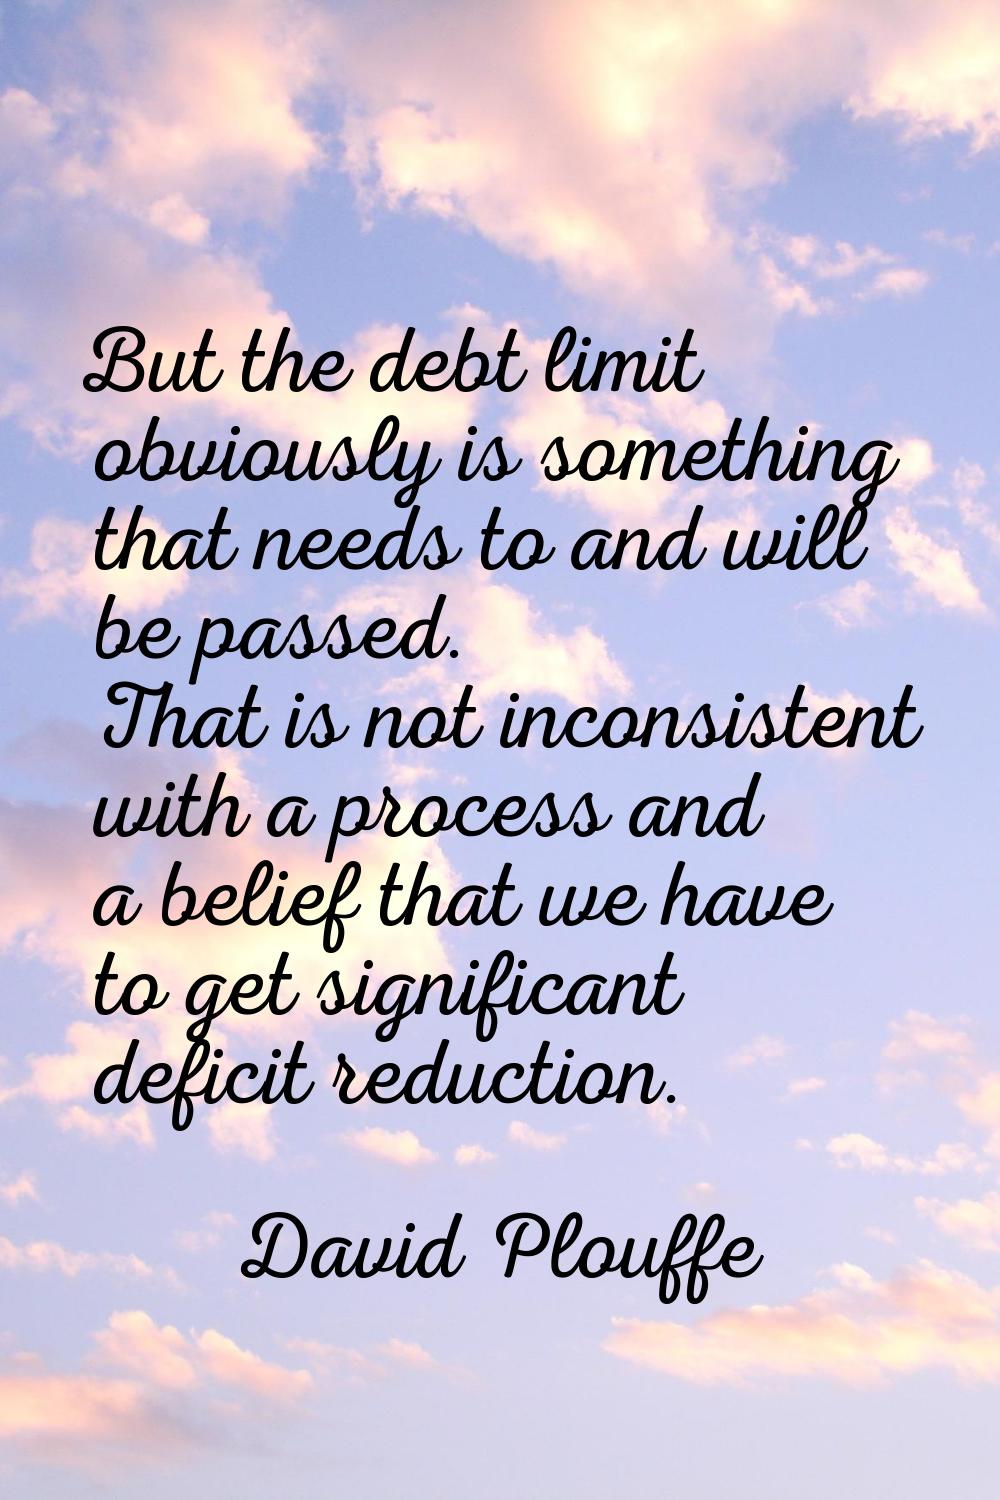 But the debt limit obviously is something that needs to and will be passed. That is not inconsisten